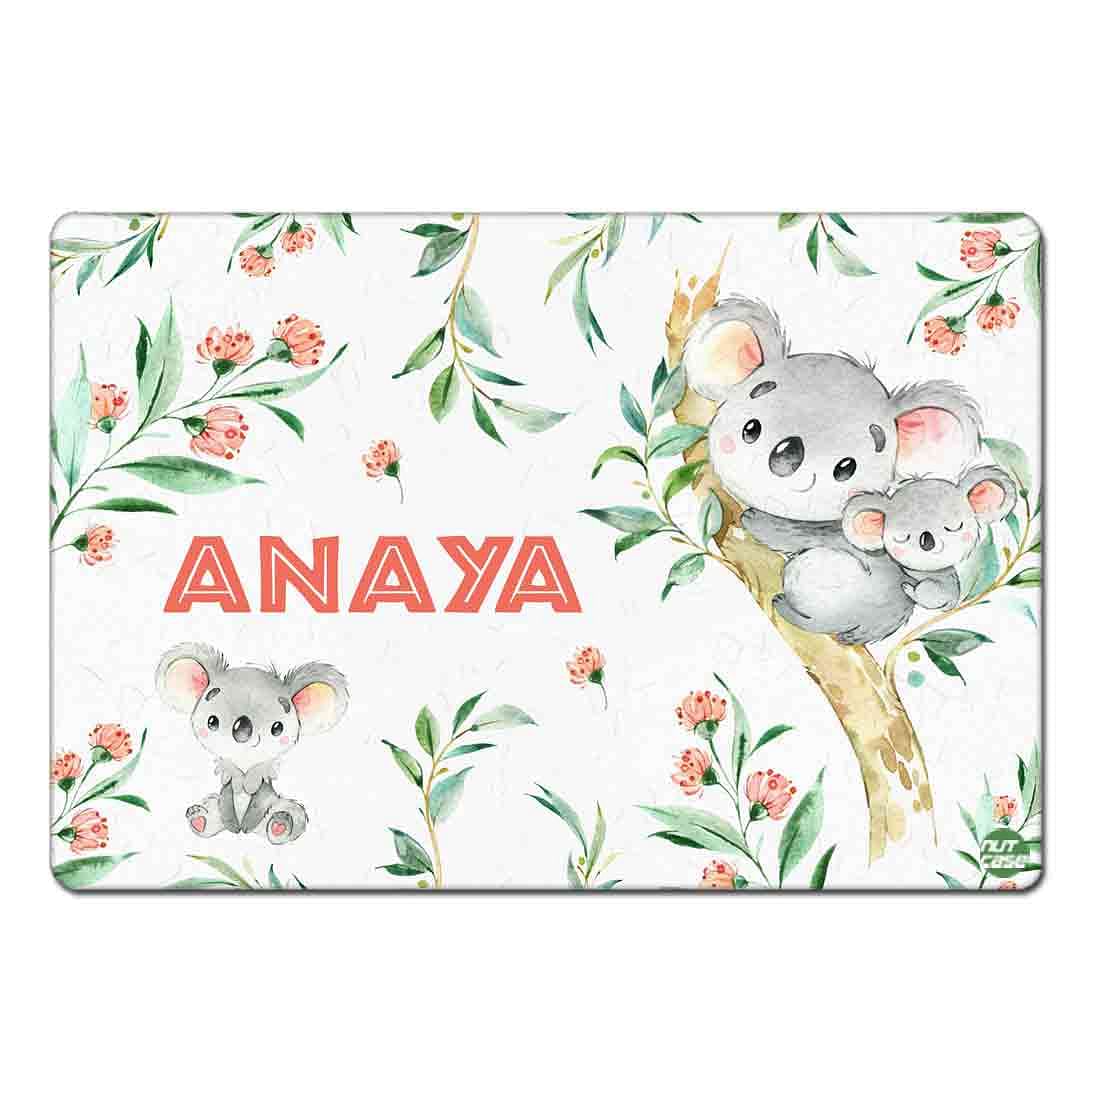 Personalized Made Table Mats for Kids Dining Tables - Cute Koala Nutcase